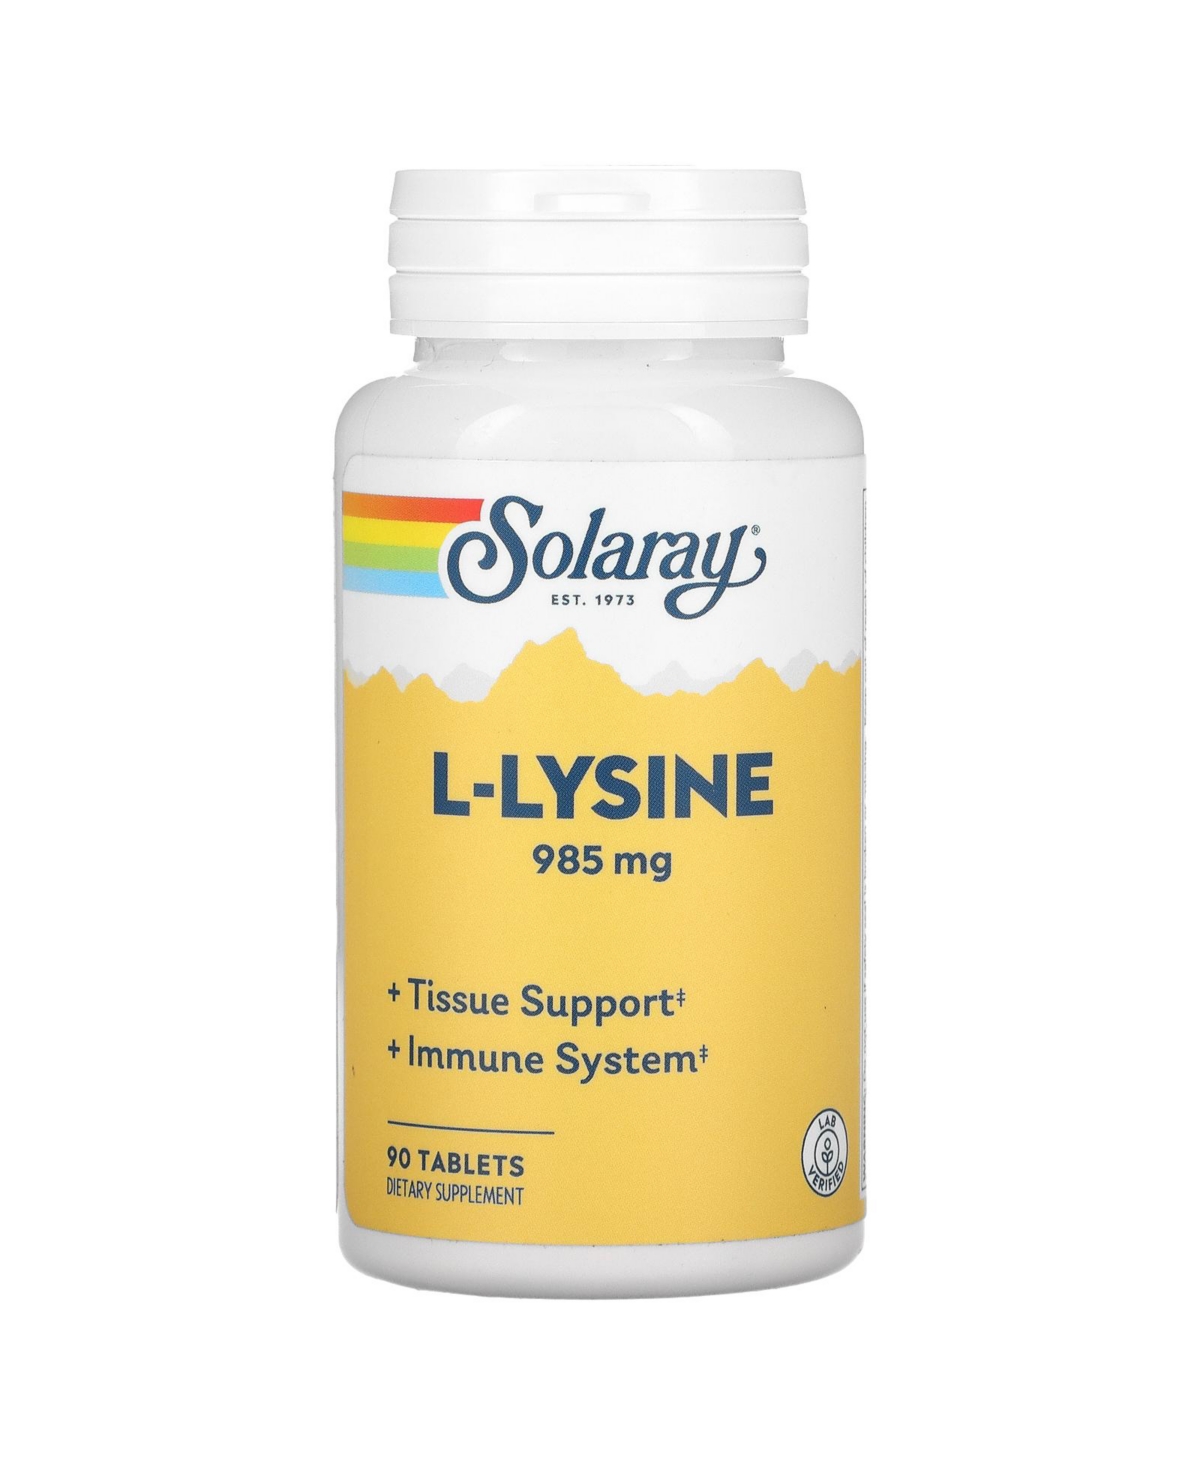 L-Lysine 985 mg - 90 Tablets (328 mg per Tablet) - Assorted Pre-Pack